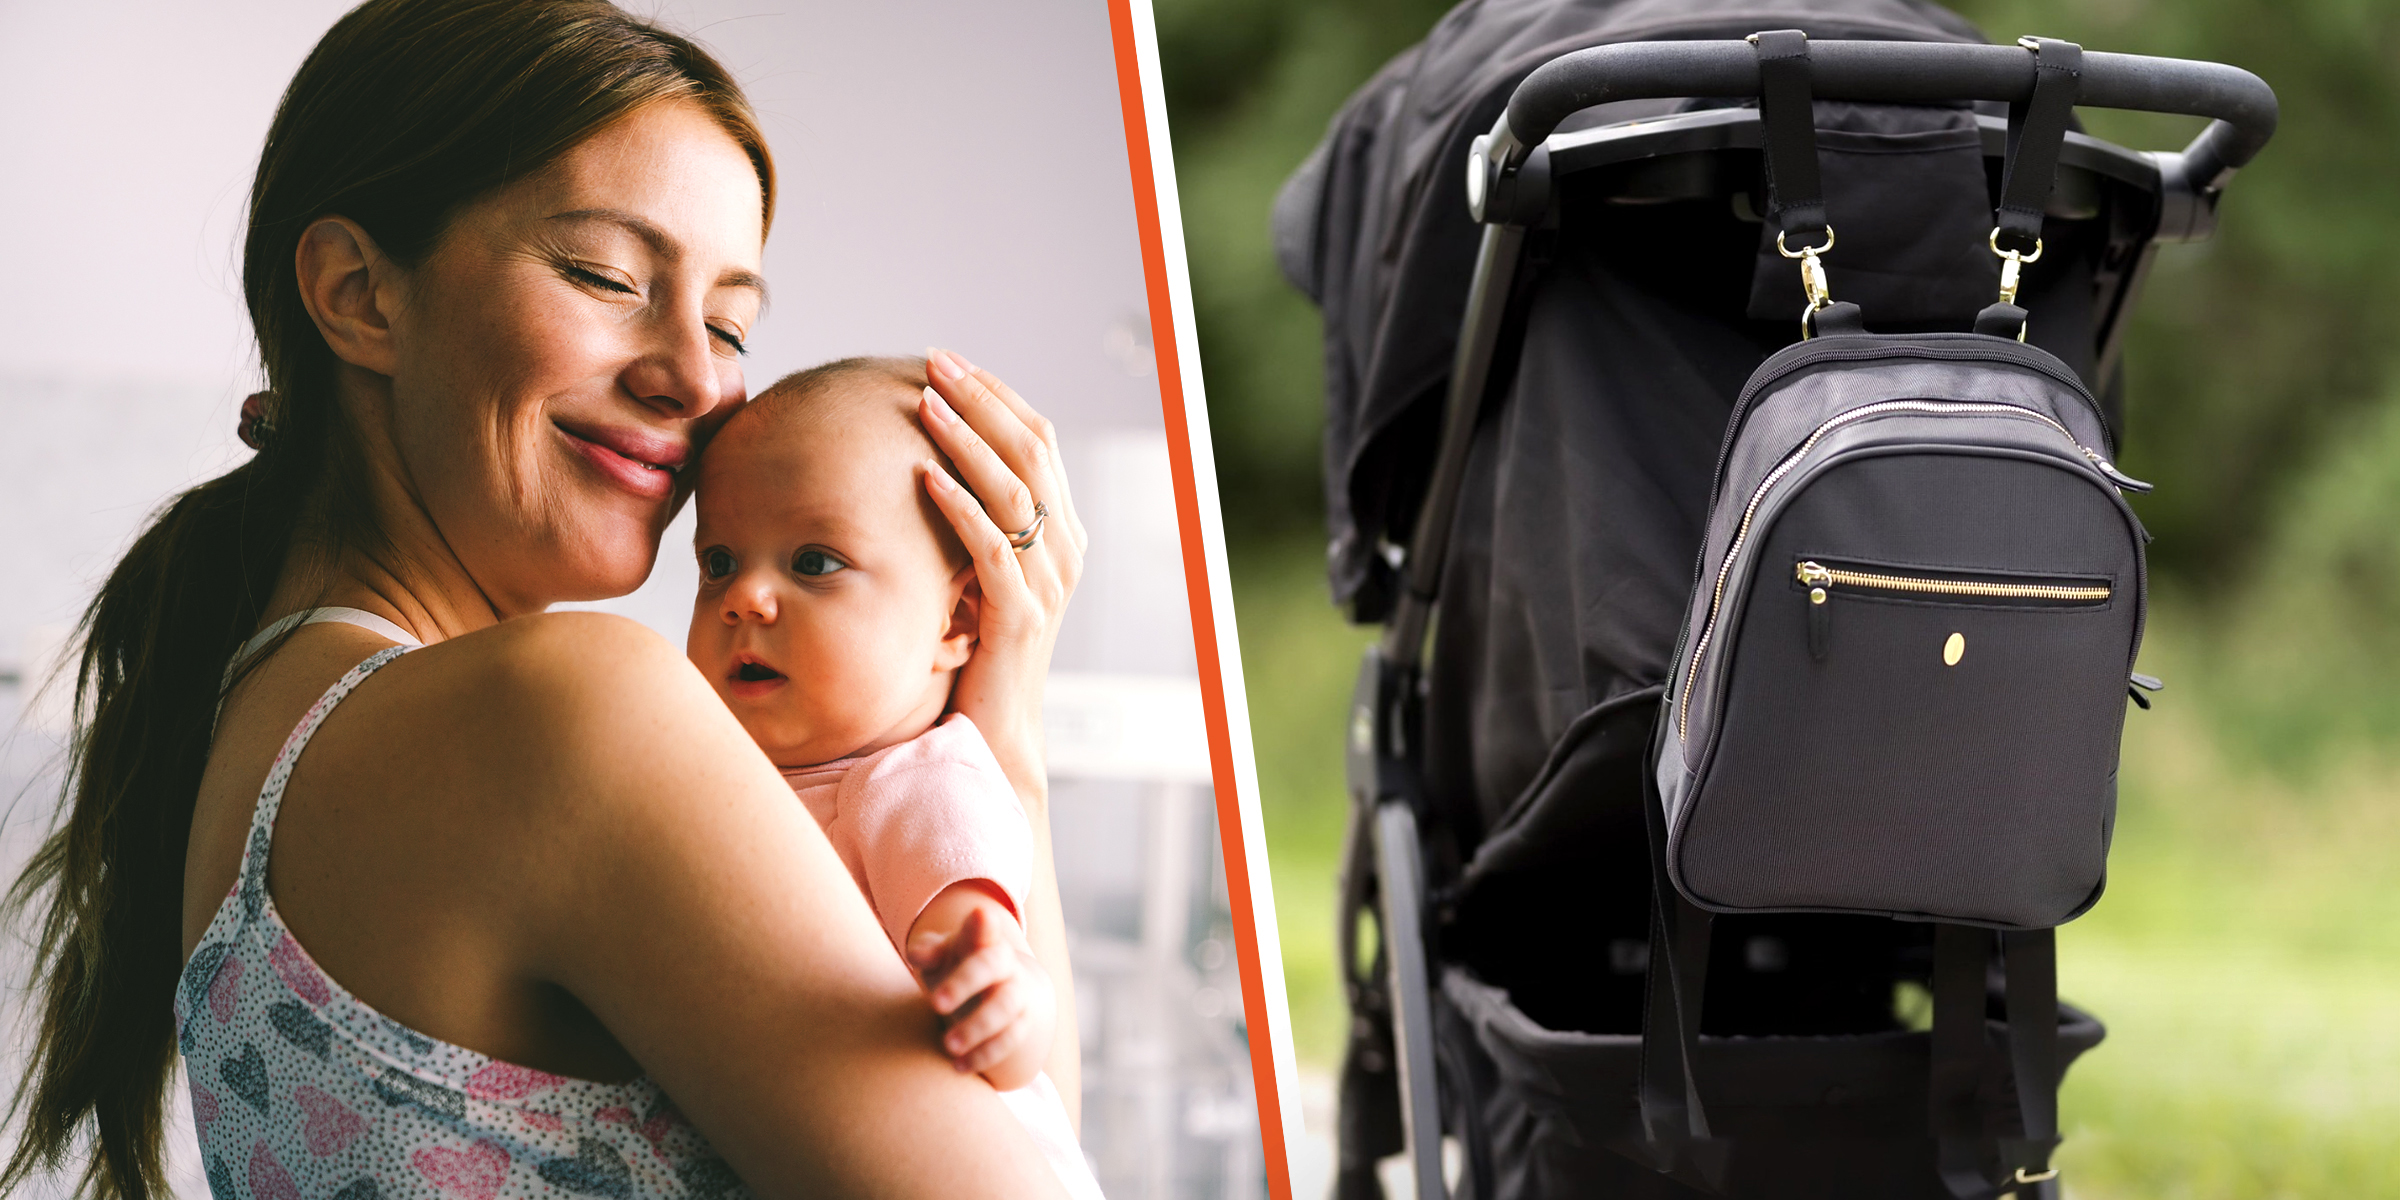 A mother and her baby | The Chertsey Breast Pump Backpack | Source: Getty Images | Instagram/idaho_jones